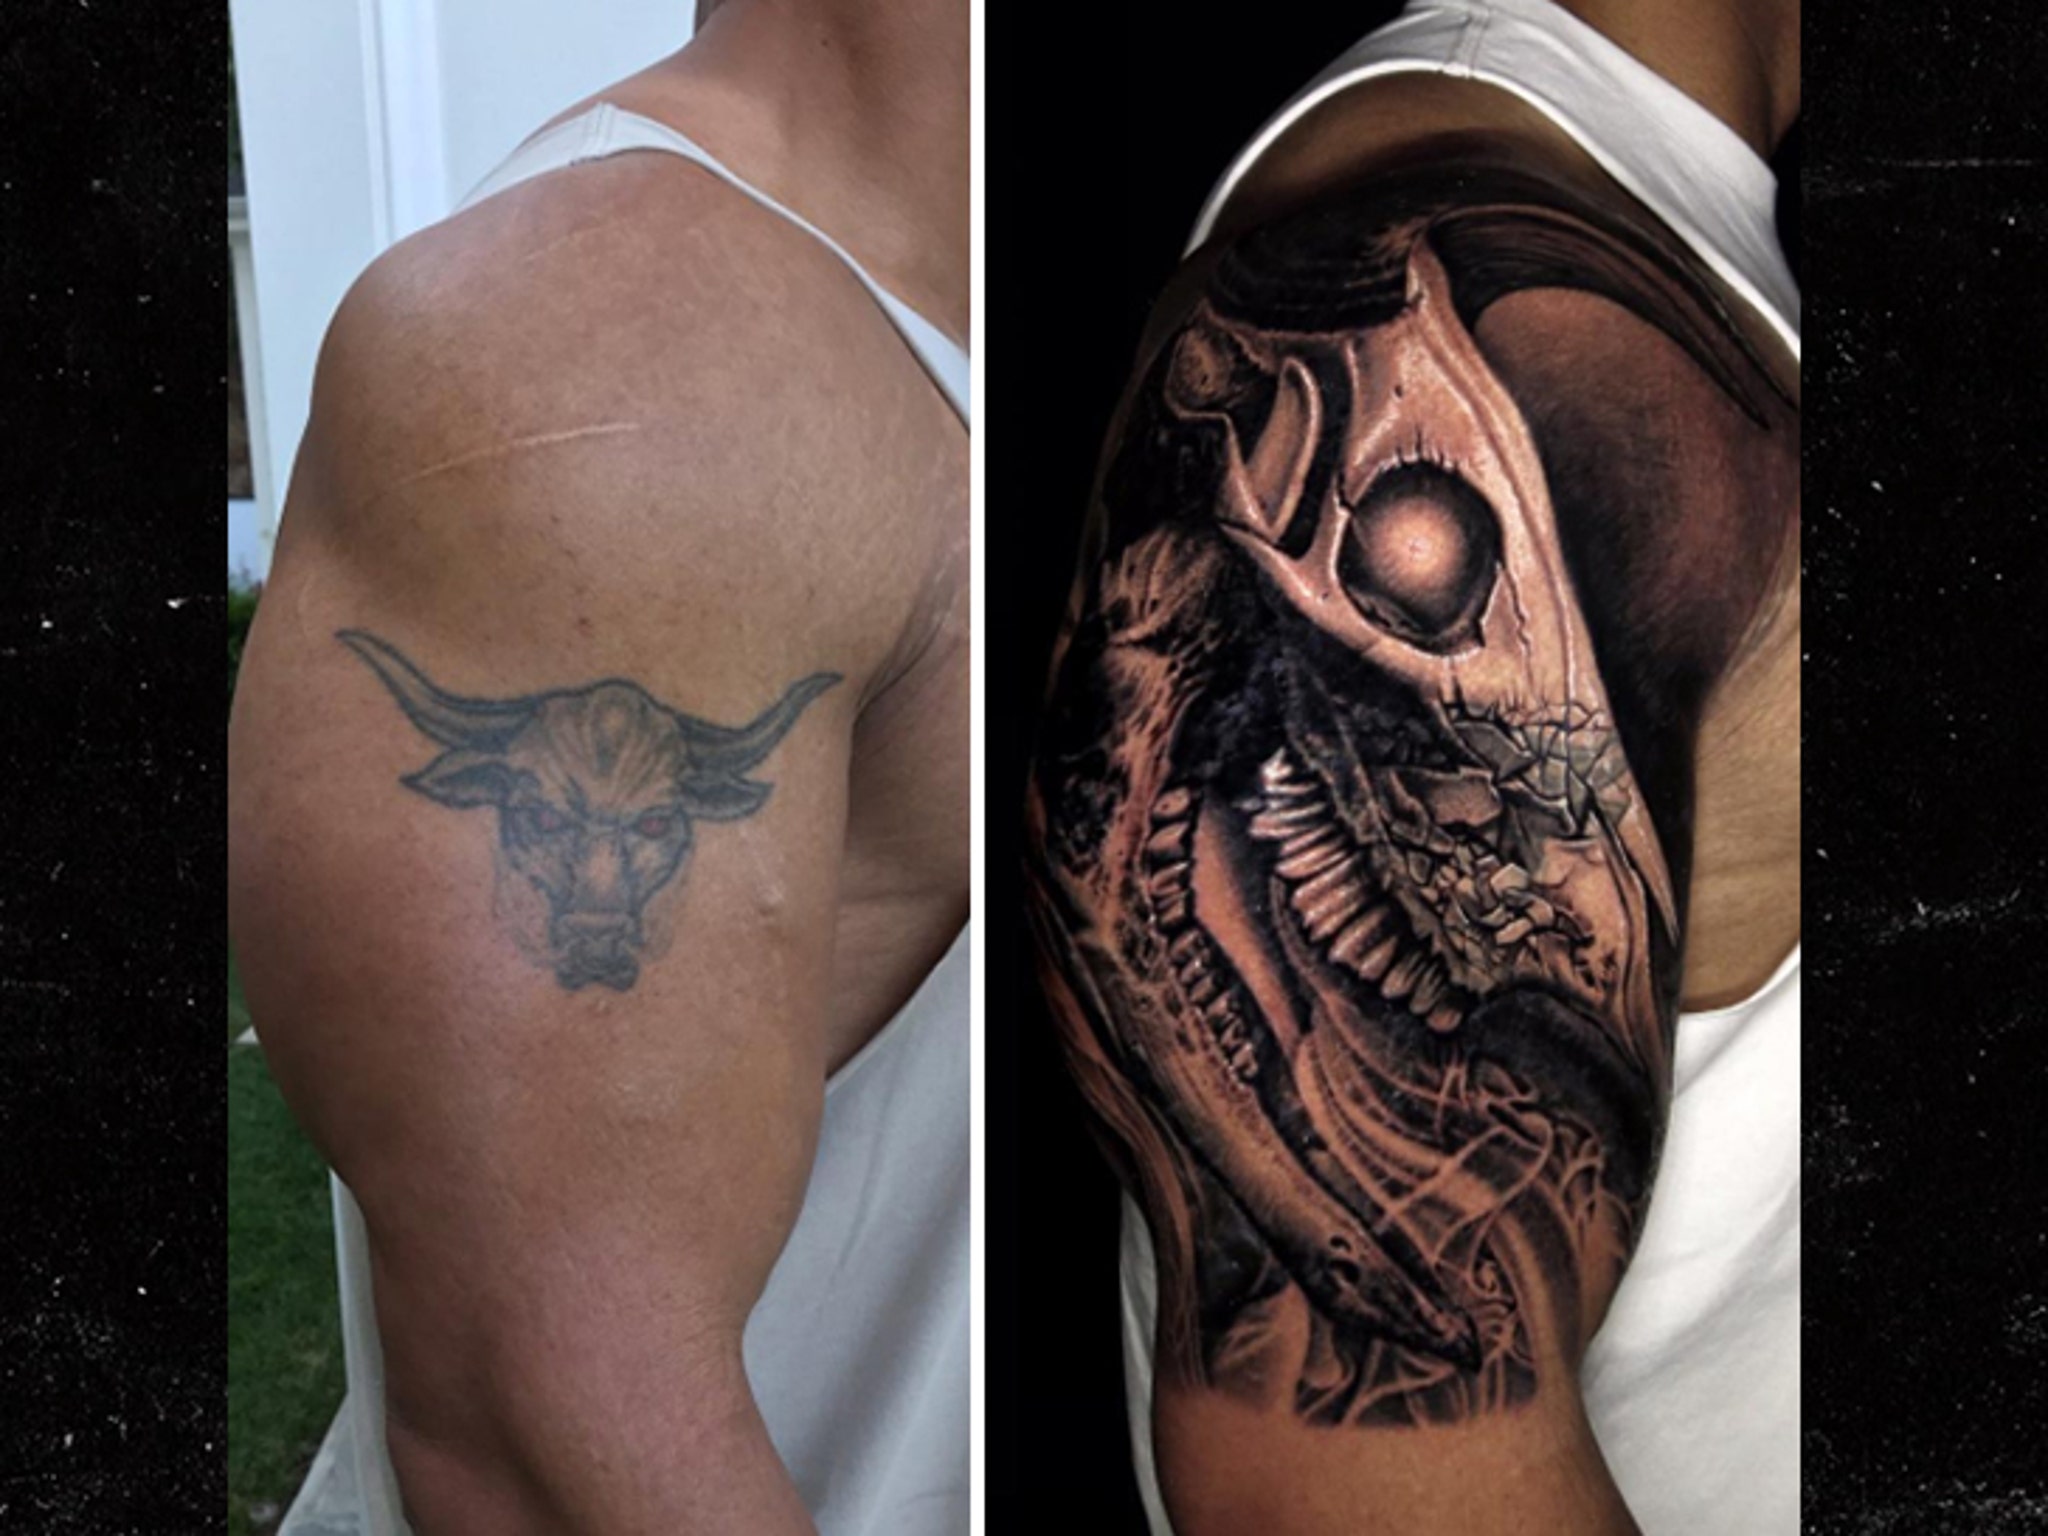 The Rock Covers Up Iconic Bull Tattoo With Bigger Bull Tattoo